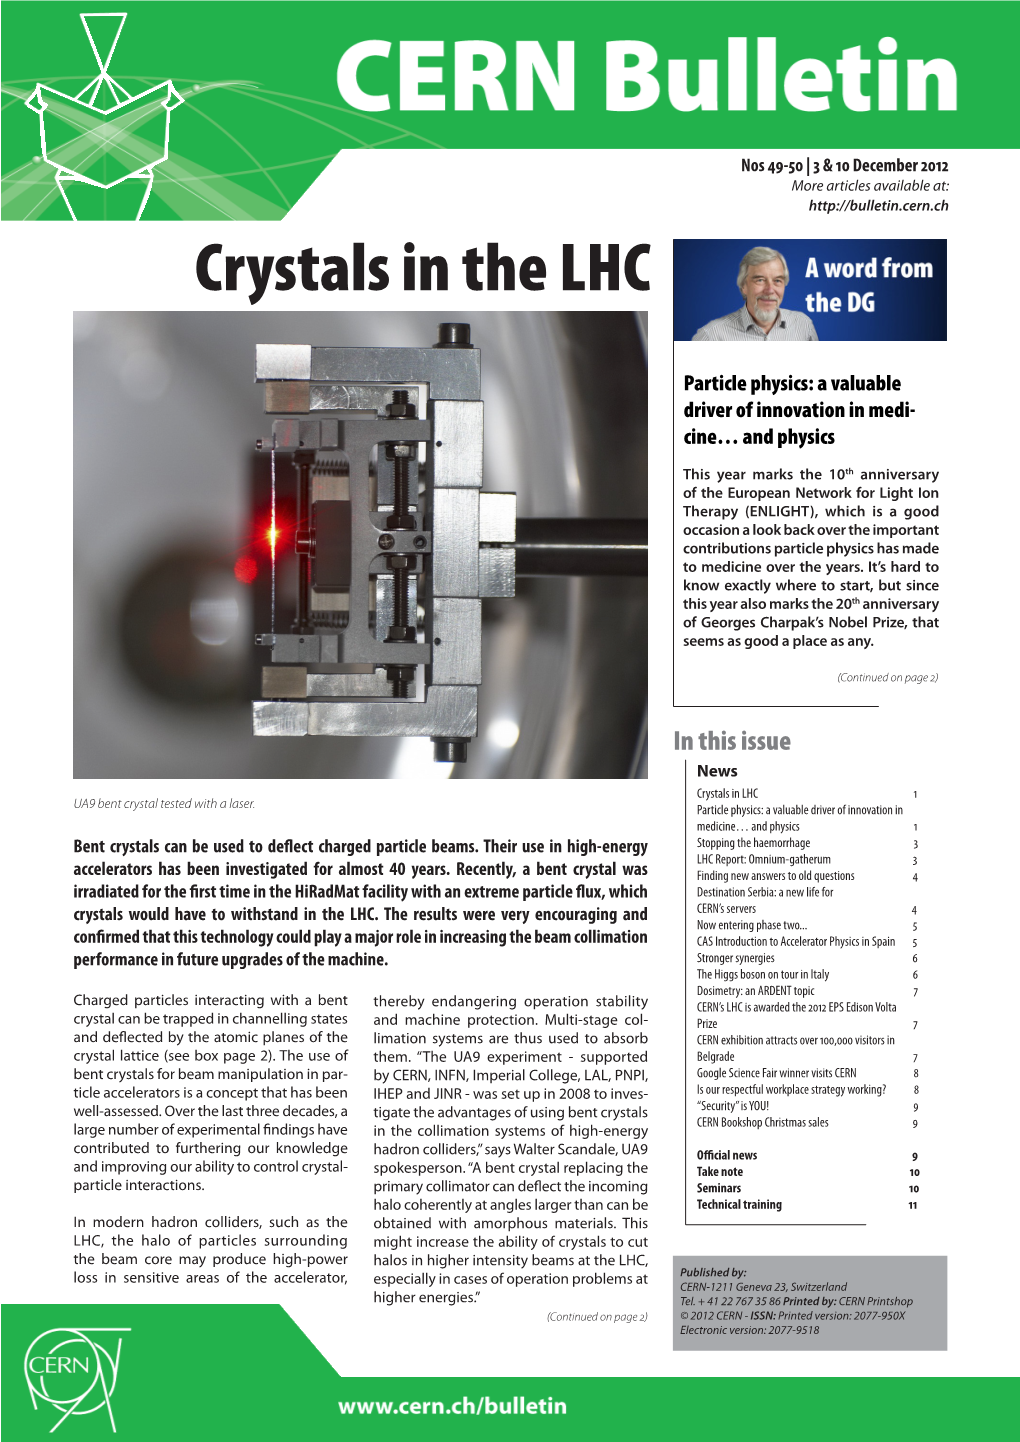 Crystals in the LHC